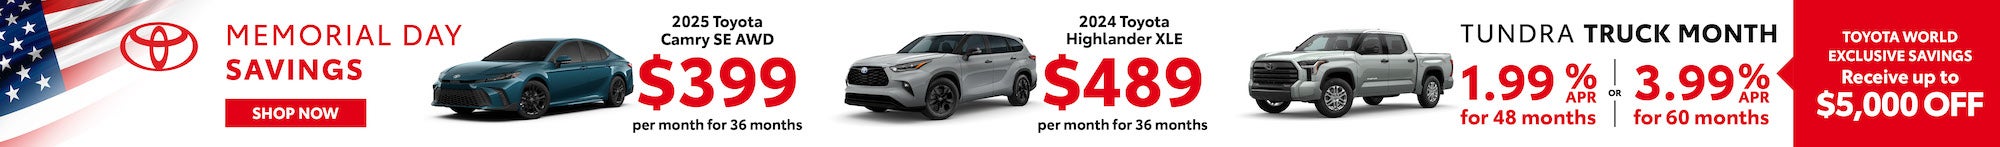 Toyota World of Clinton March 24 Lease Banner Desktop